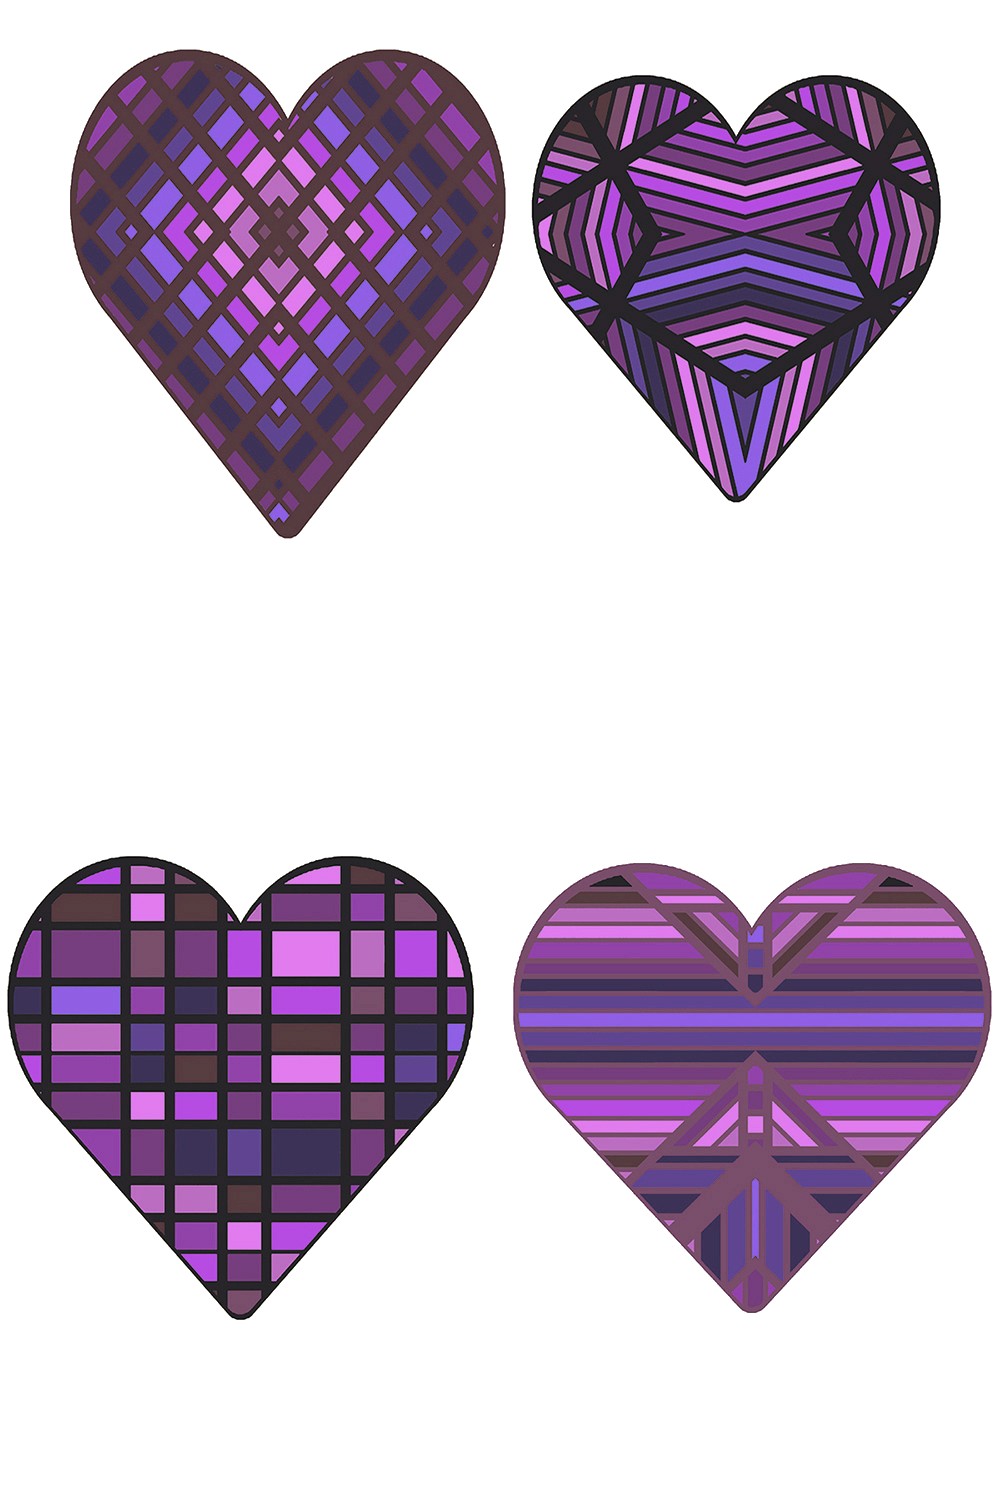 Quilted Heart Purple Hues Set of 8 DXF Files PNG SVG pinterest preview image.